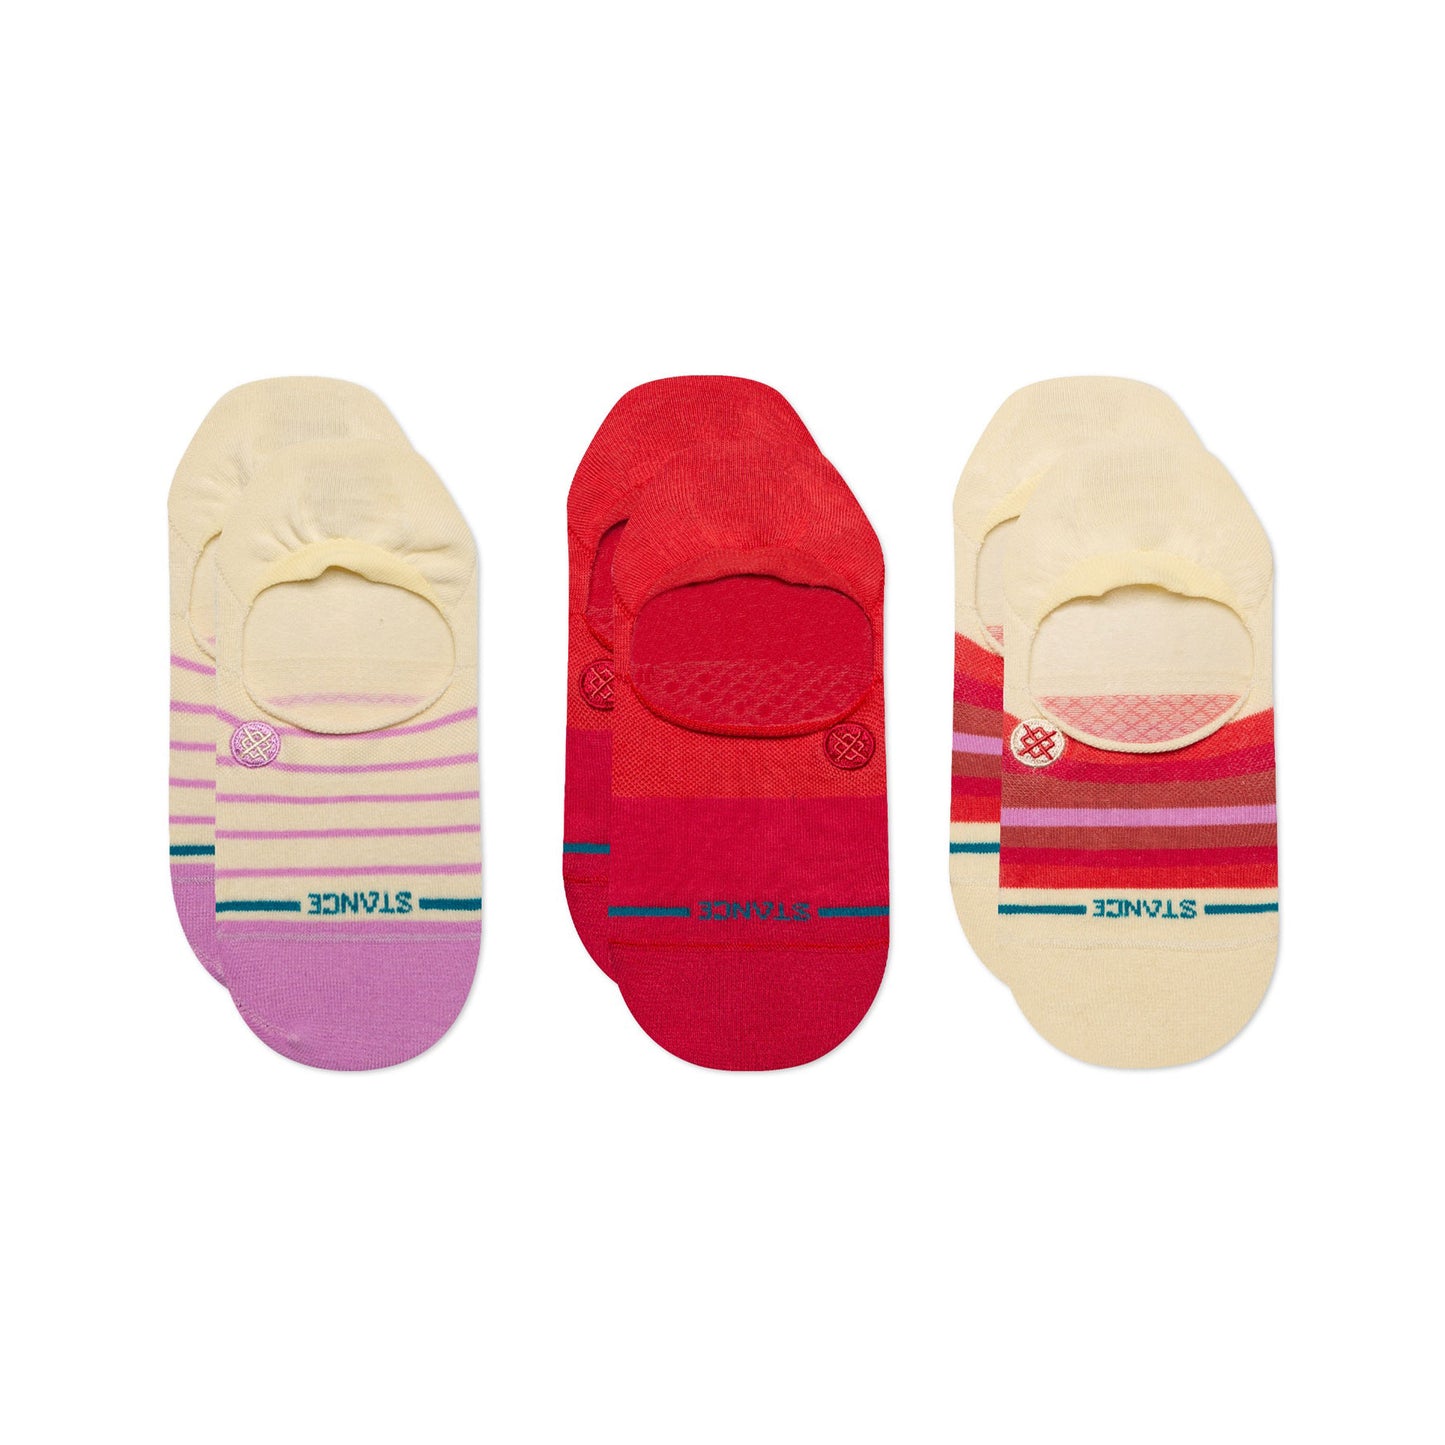 Stance Women's No Show Socks - Fulfilled 3 Pack - Pink